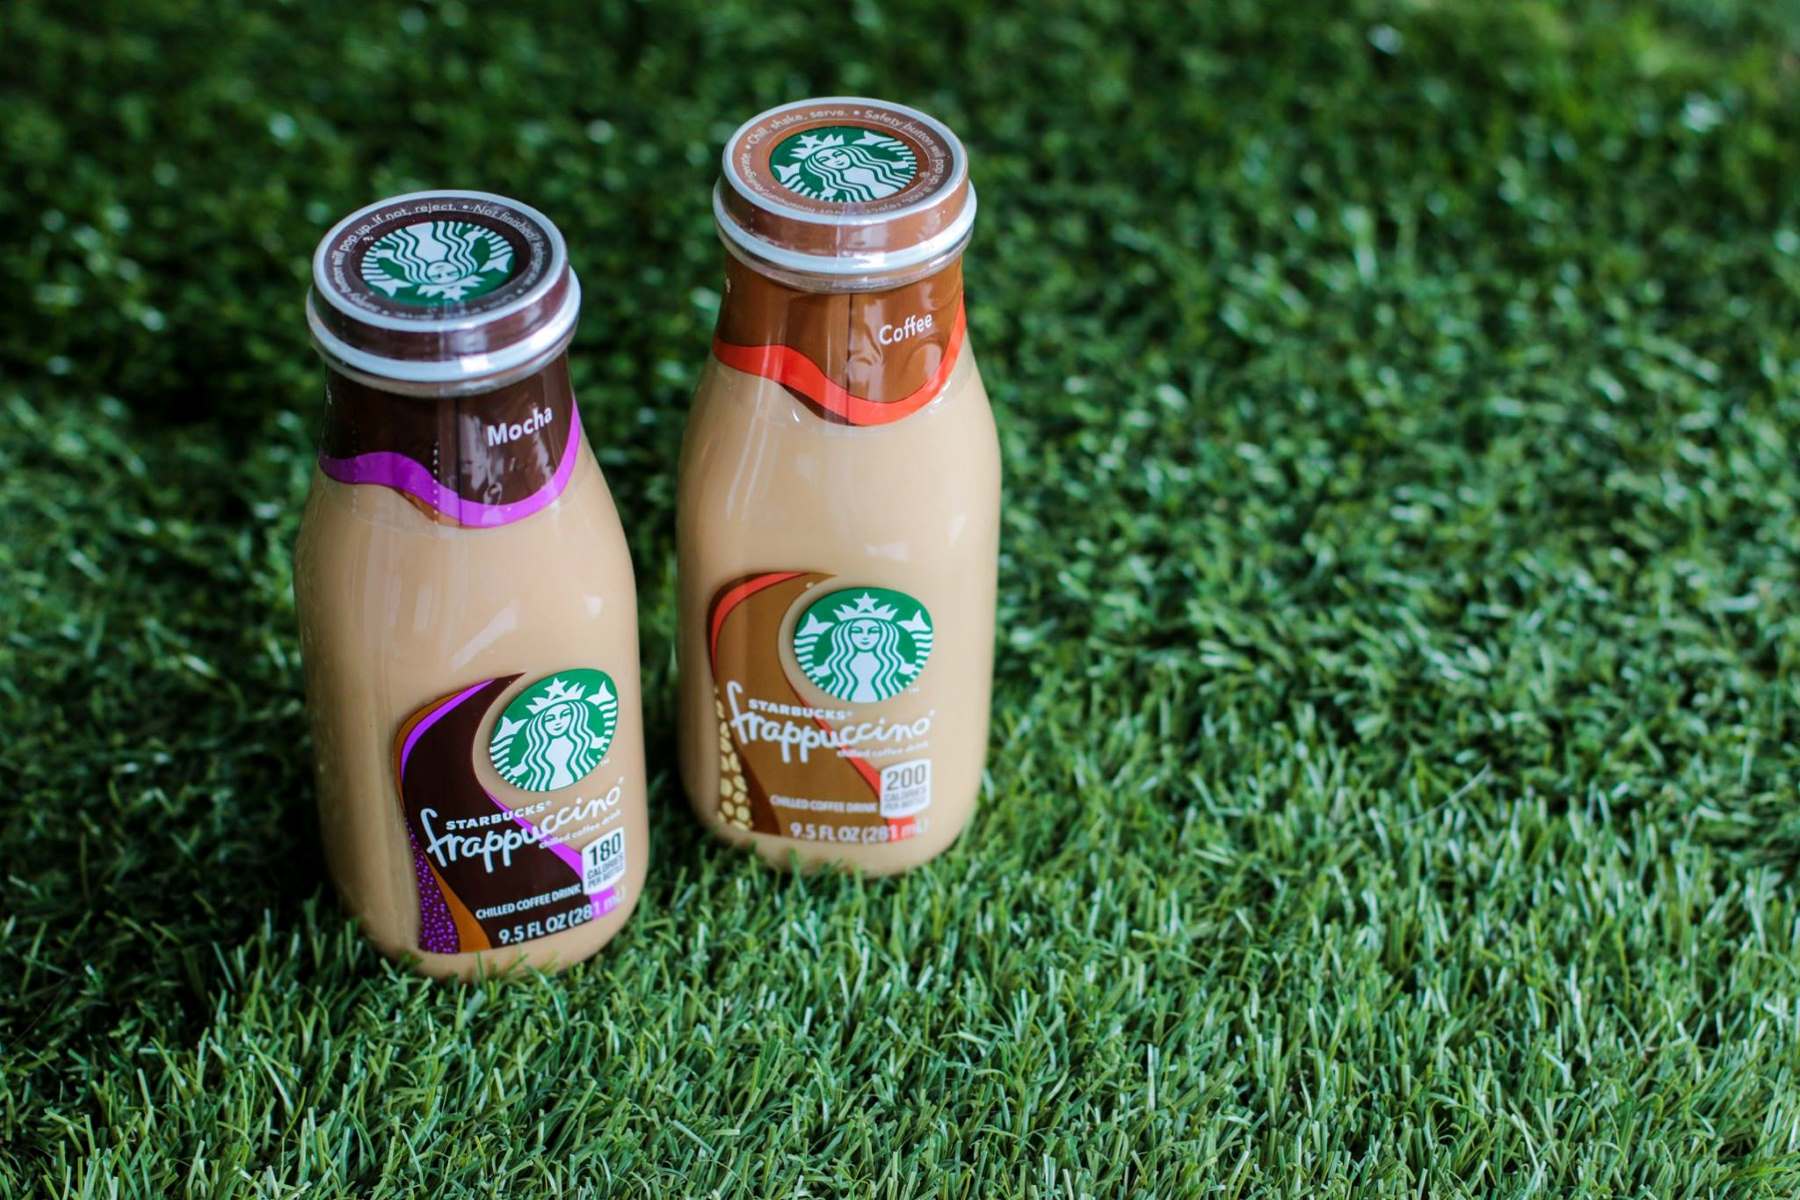 18-starbucks-frappuccino-bottle-nutrition-facts